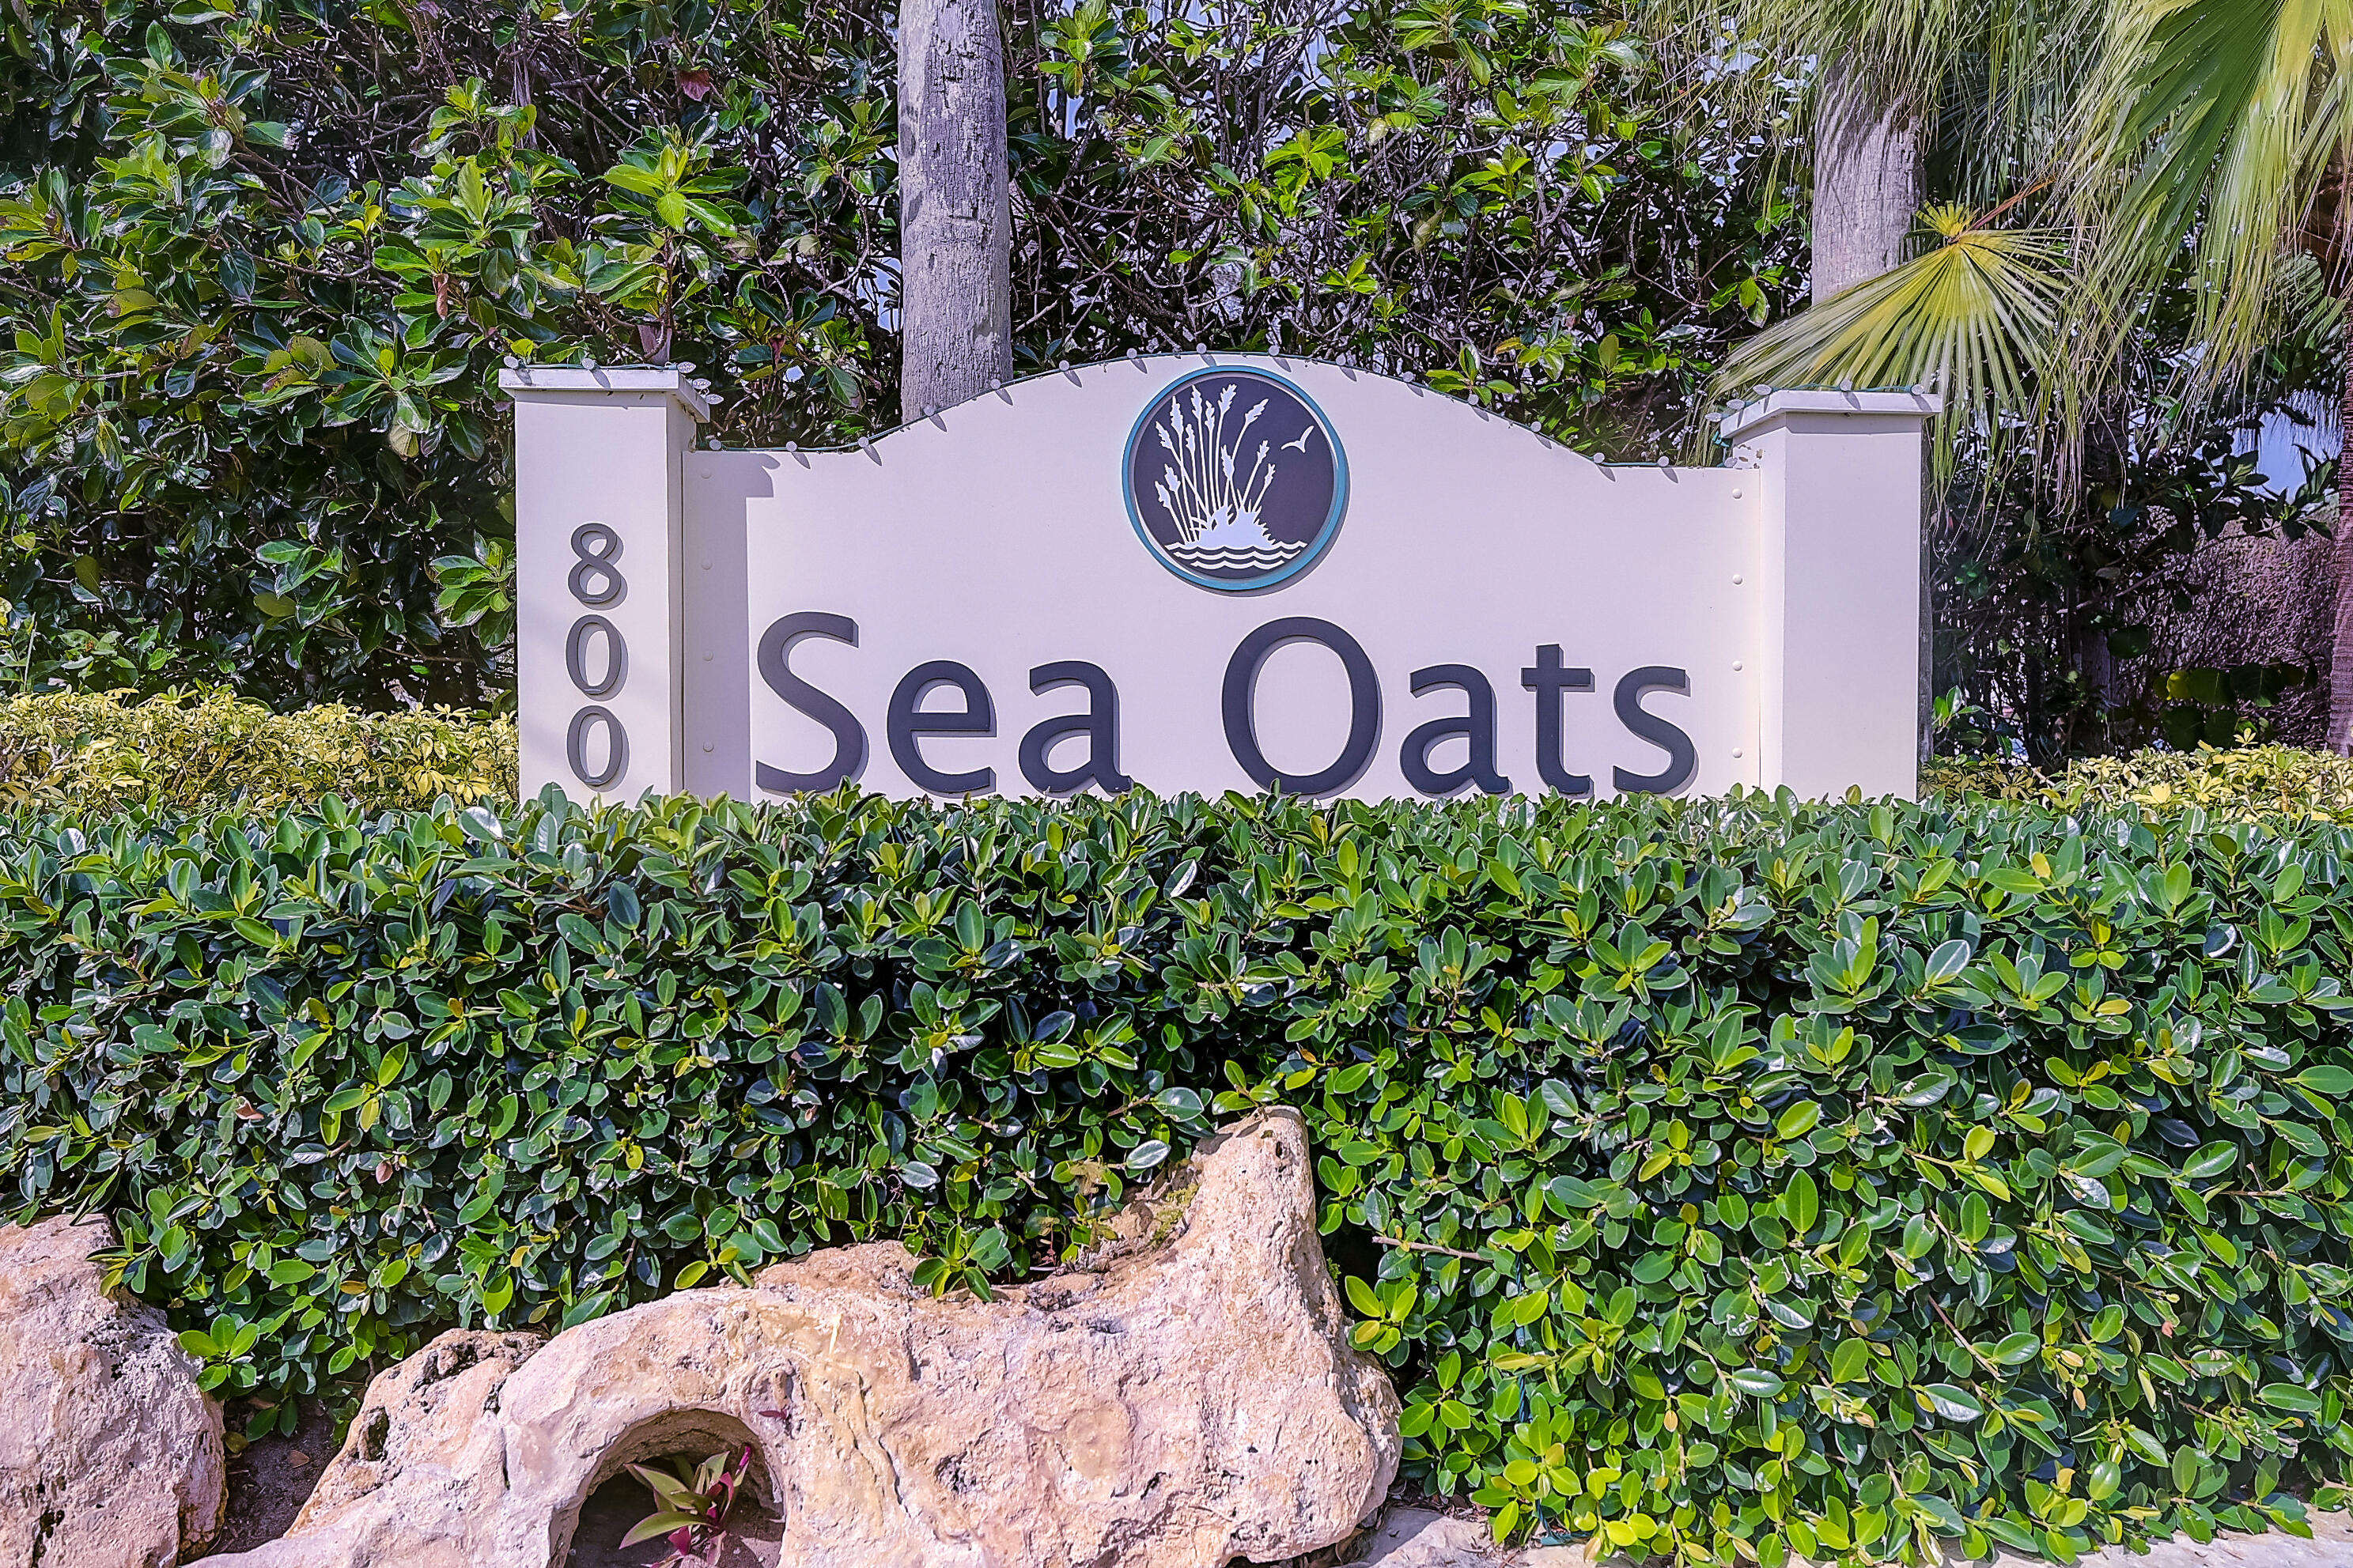 Property for Sale at 303 Sea Oats Drive D, Juno Beach, Palm Beach County, Florida - Bedrooms: 3 
Bathrooms: 2  - $499,000